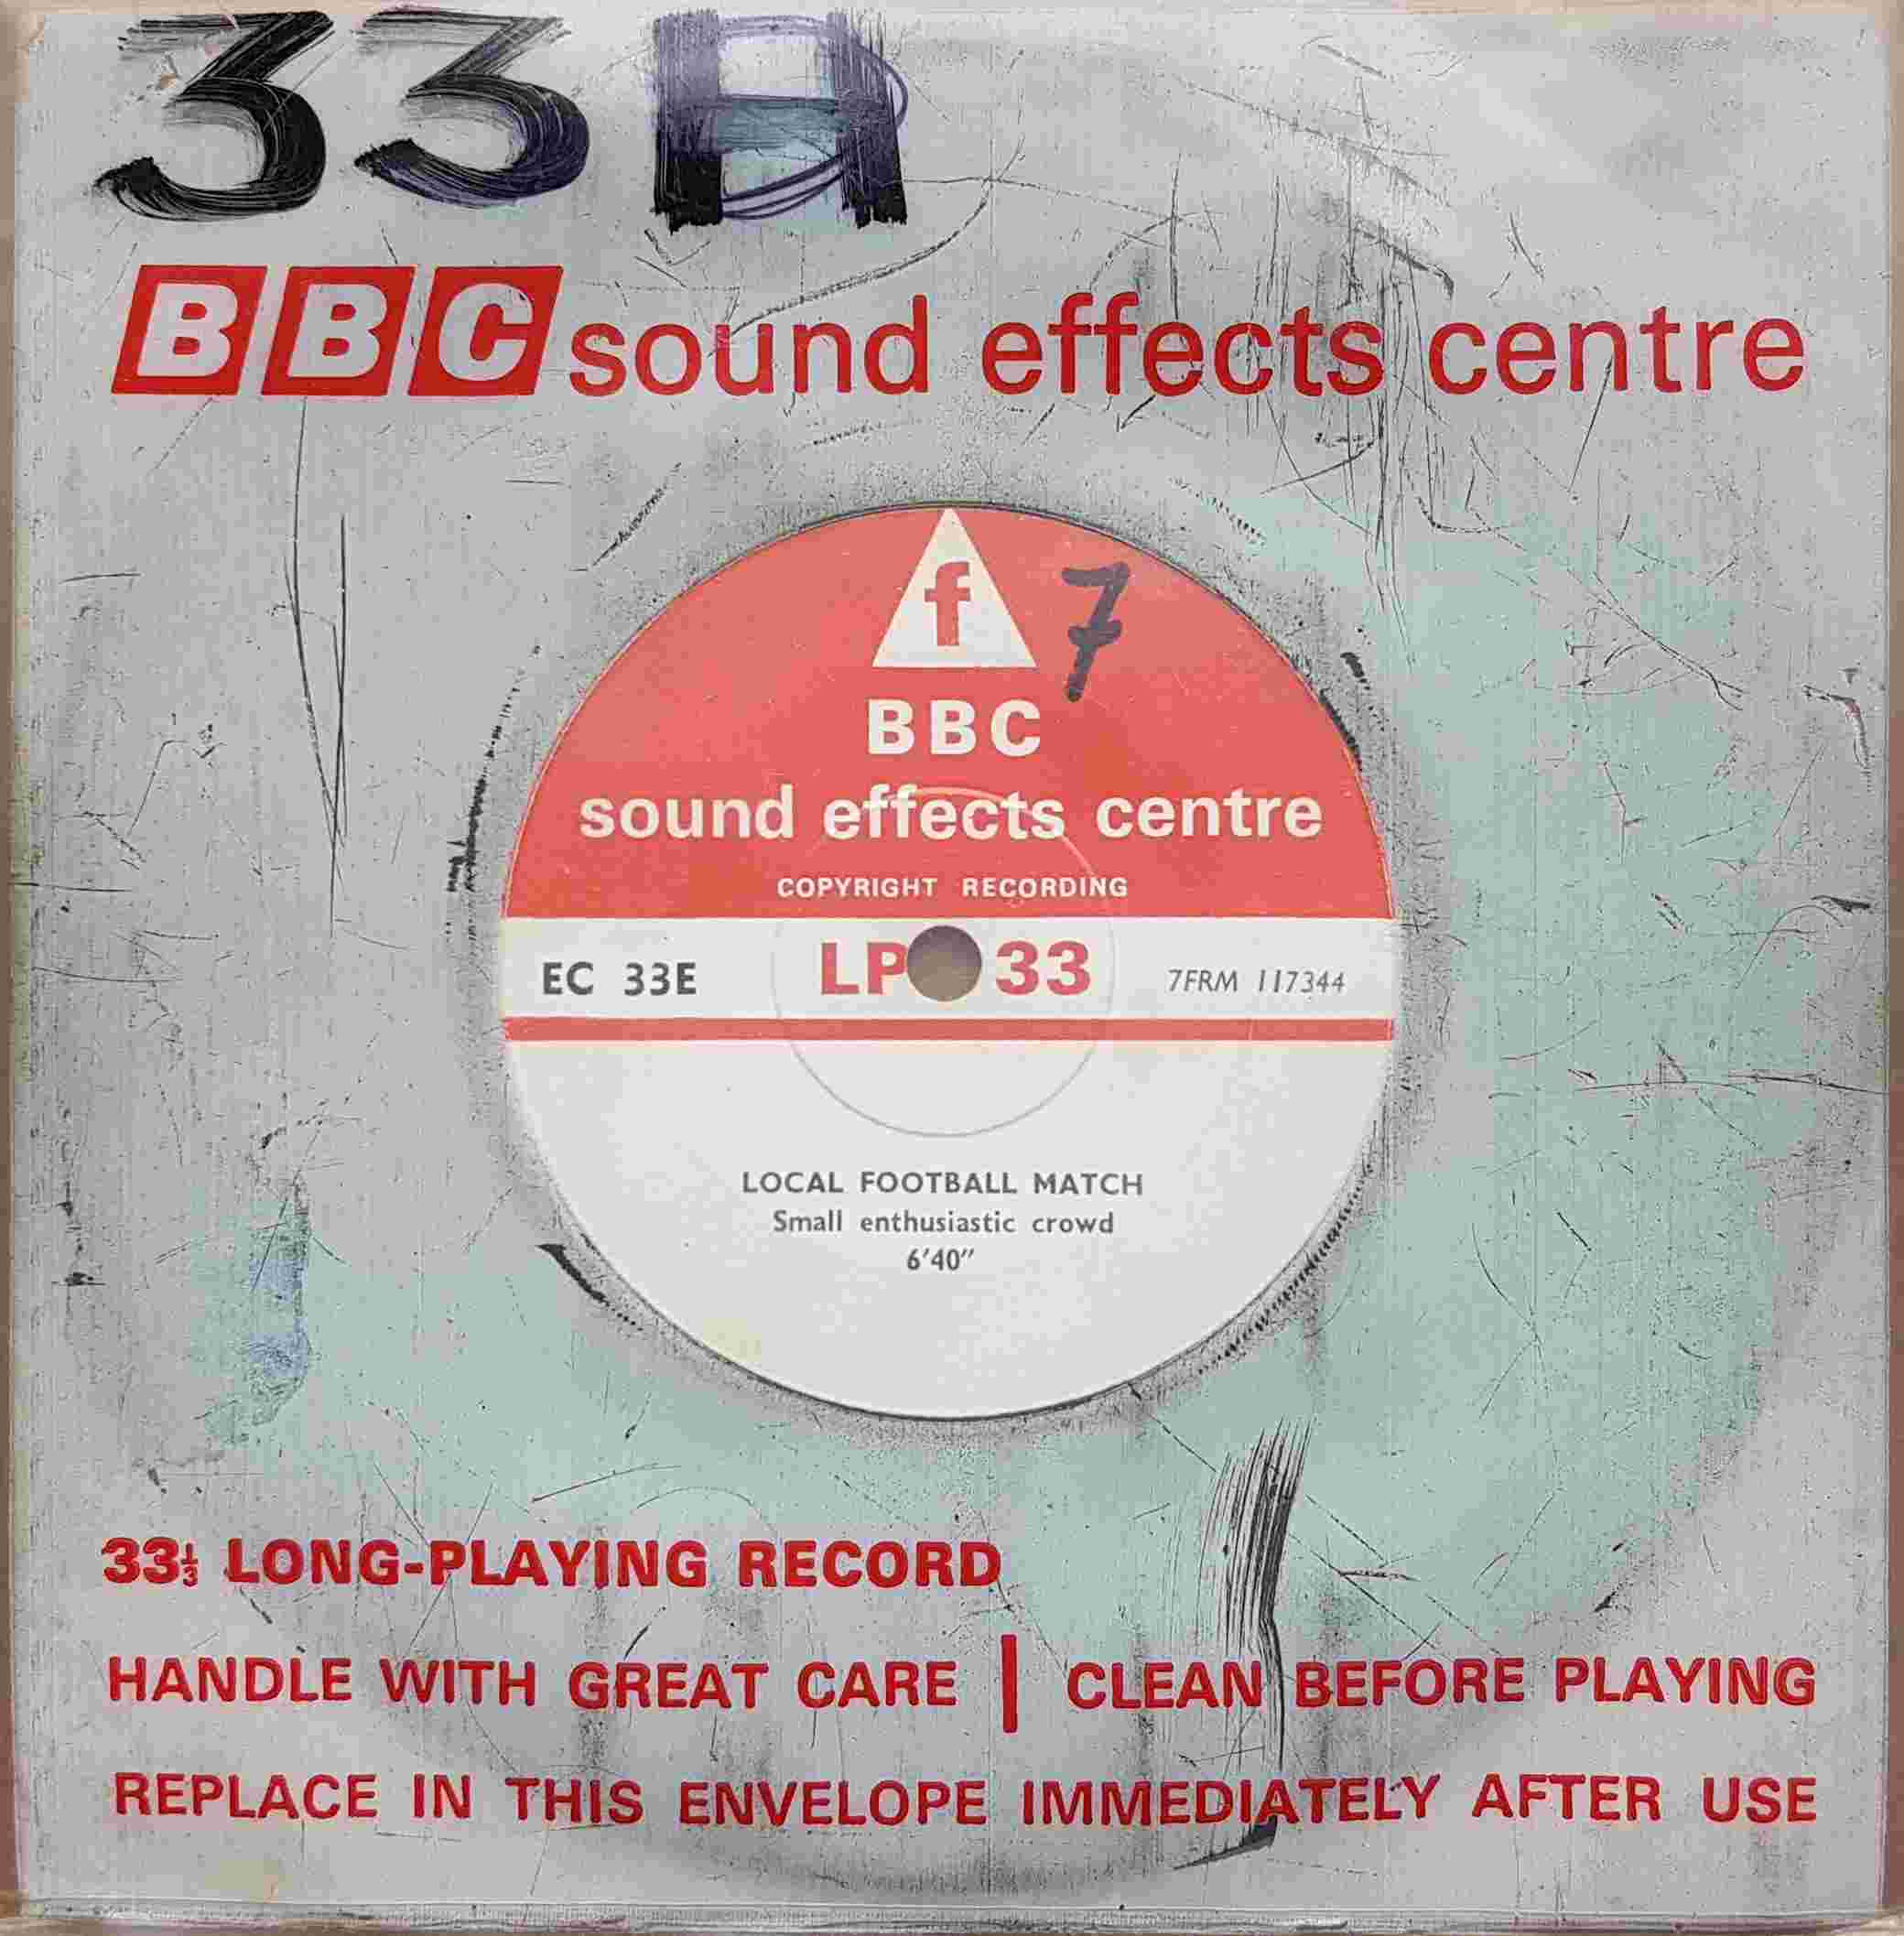 Picture of EC 33E Local football match single by artist Not registered from the BBC records and Tapes library